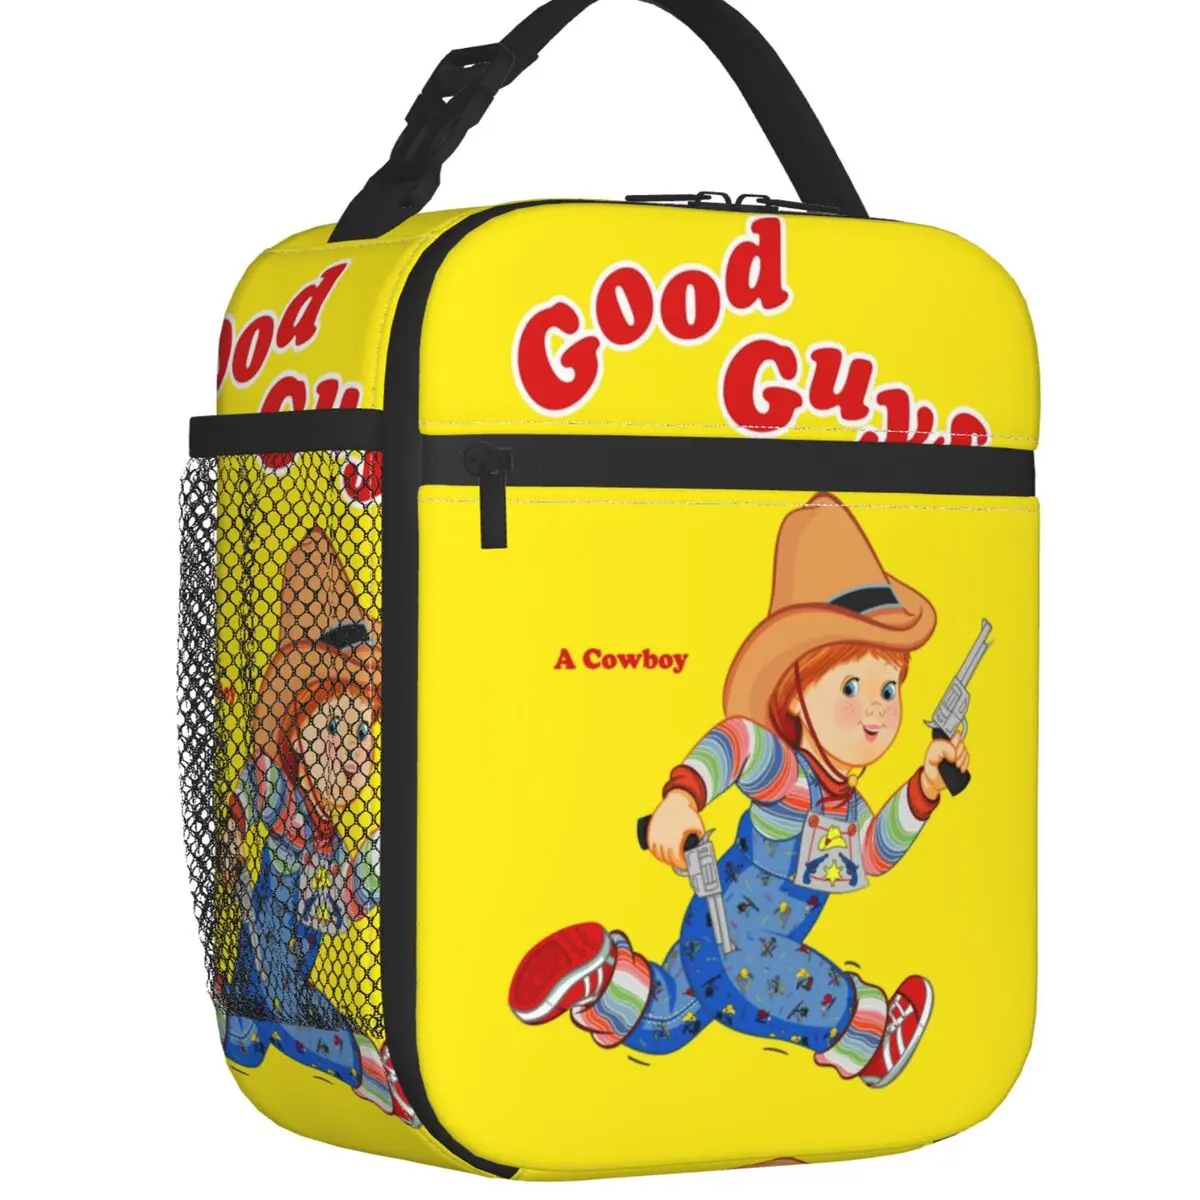 

Good Guys Cowboy Insulated Lunch Bag for School Office Child's Play Chucky Waterproof Thermal Cooler Bento Box Women Children